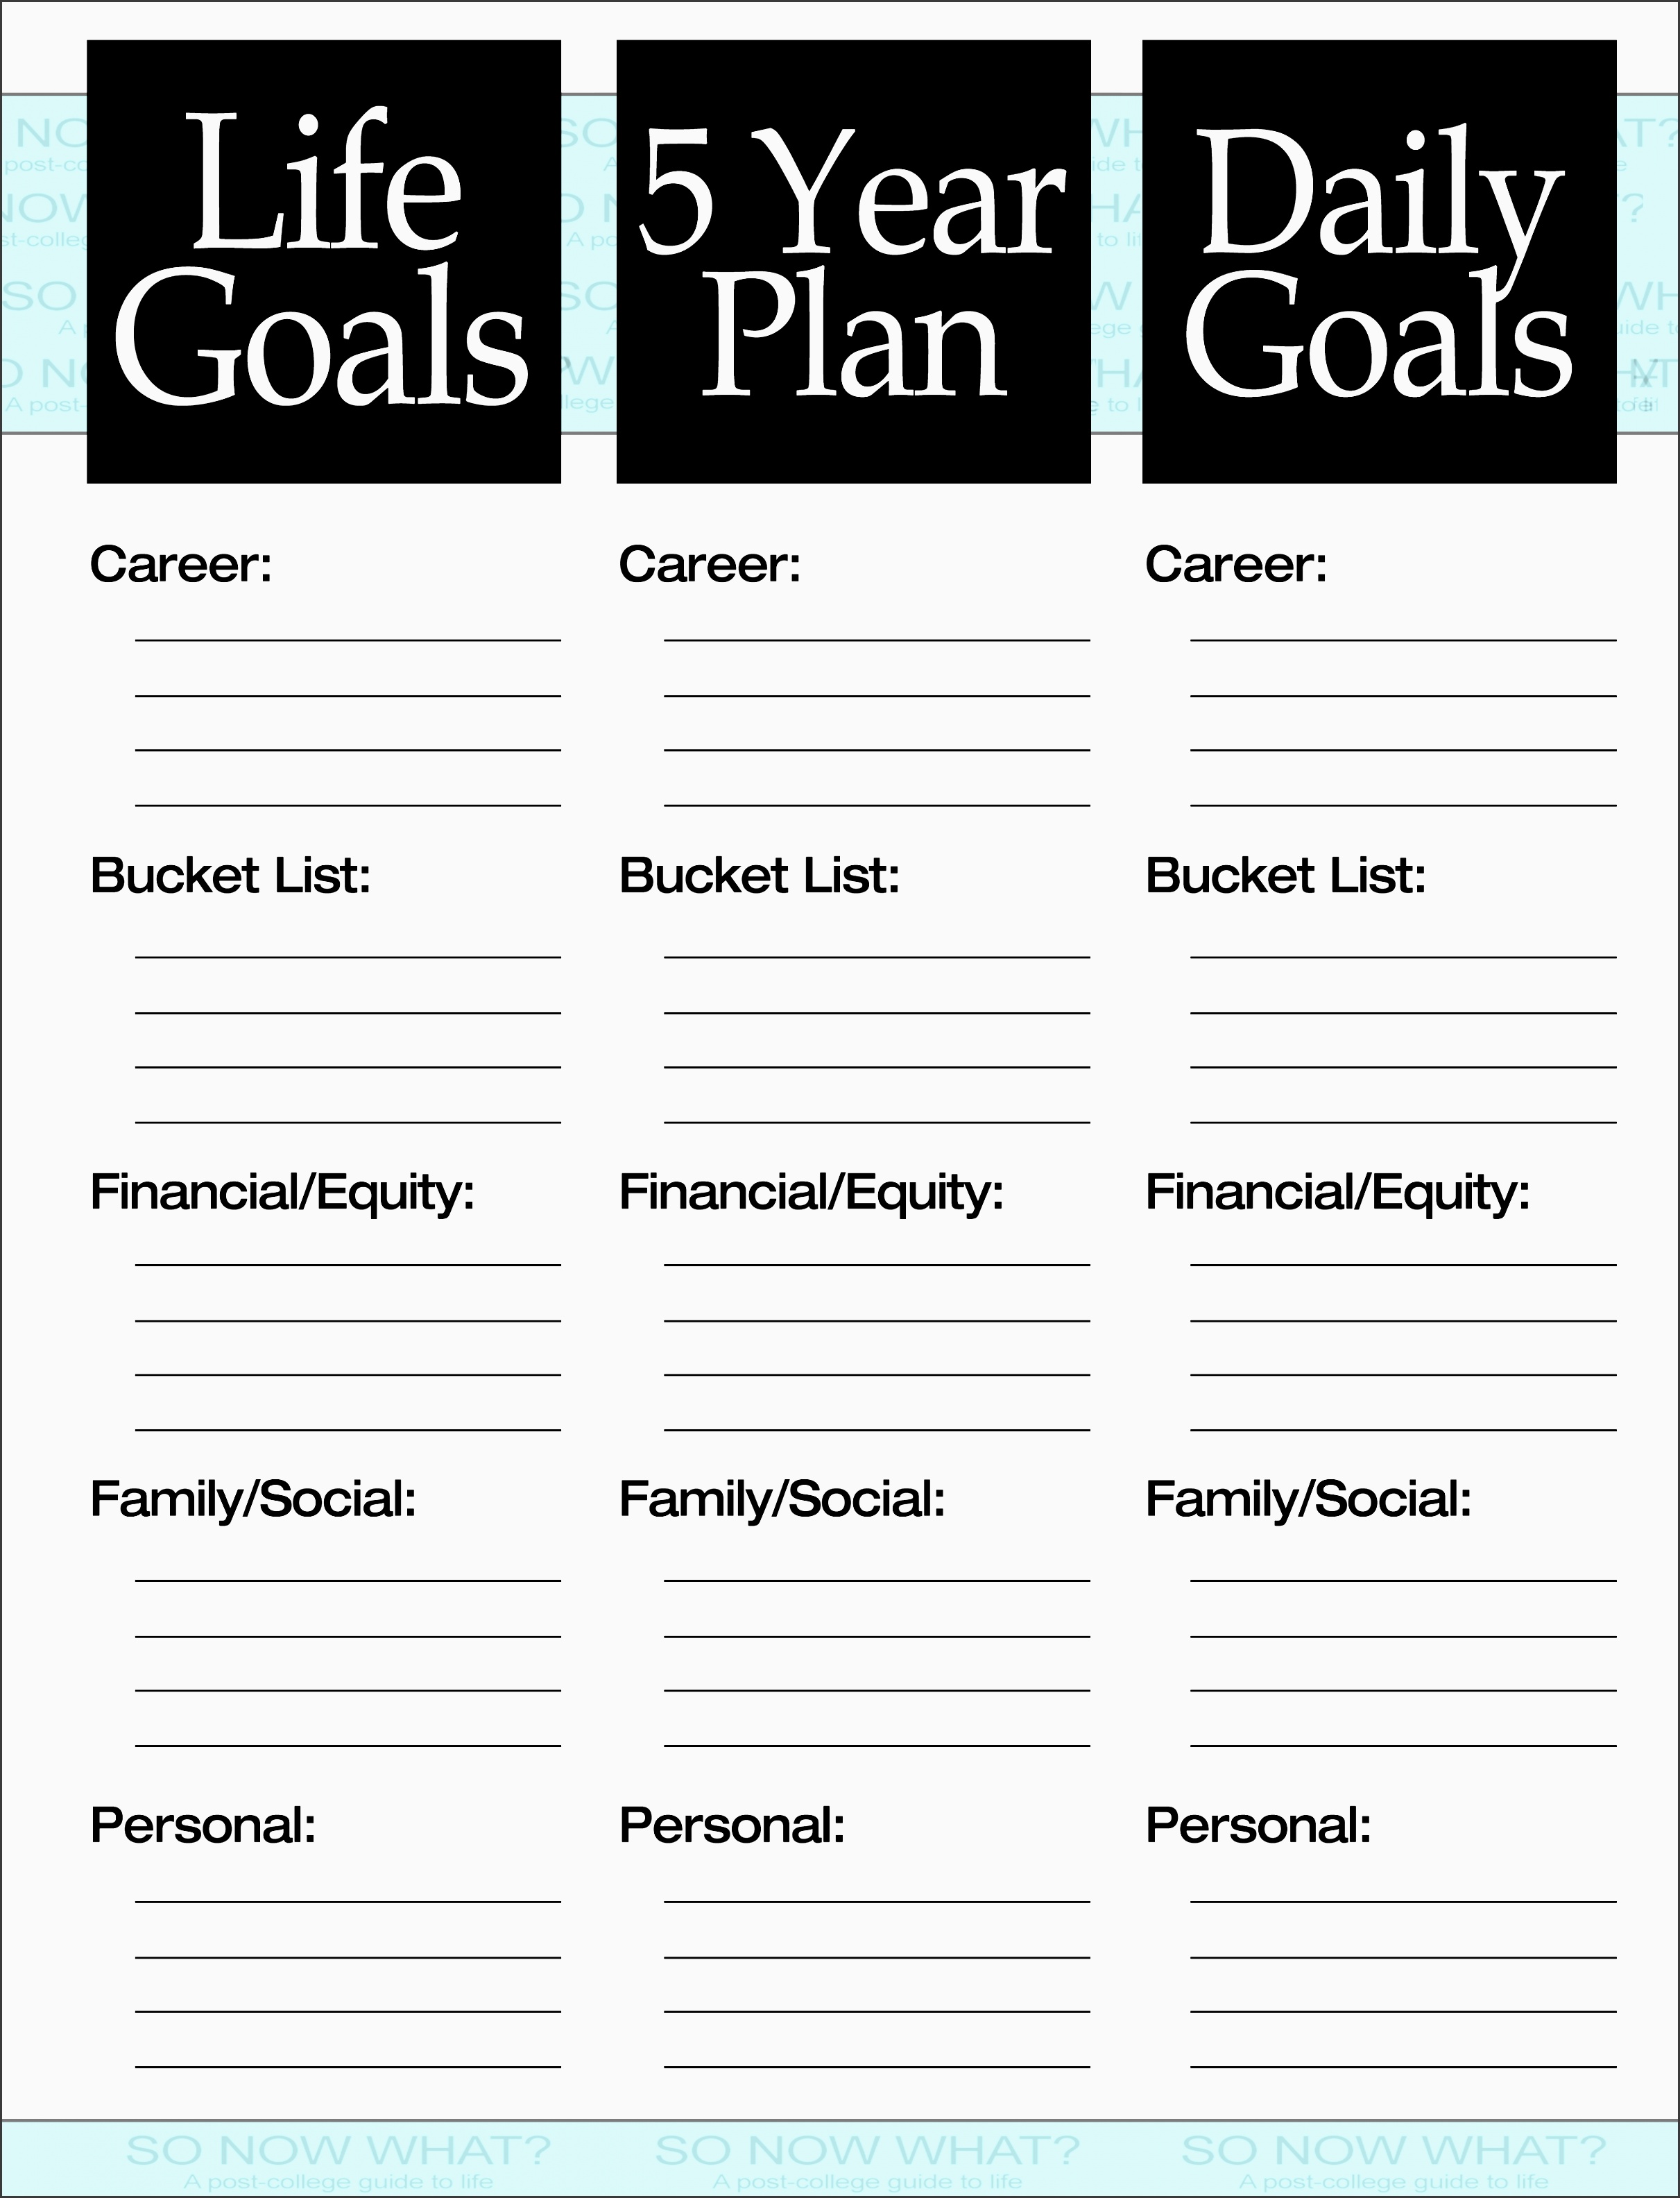 the 3 steps to a 5 year plan so now what